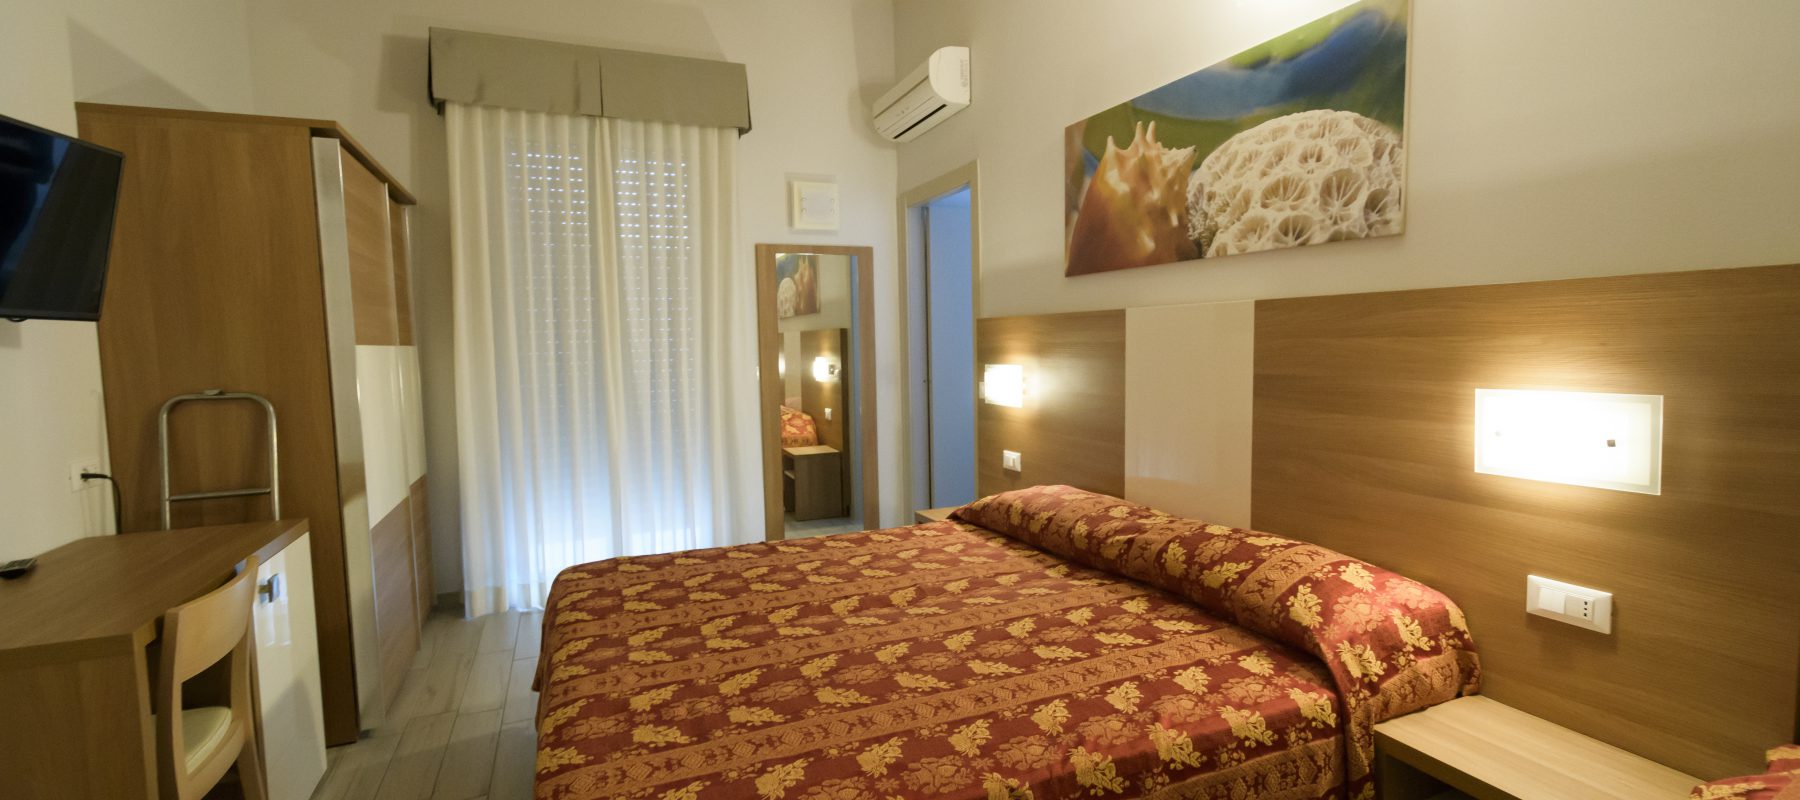 Comfortable rooms for special breaks